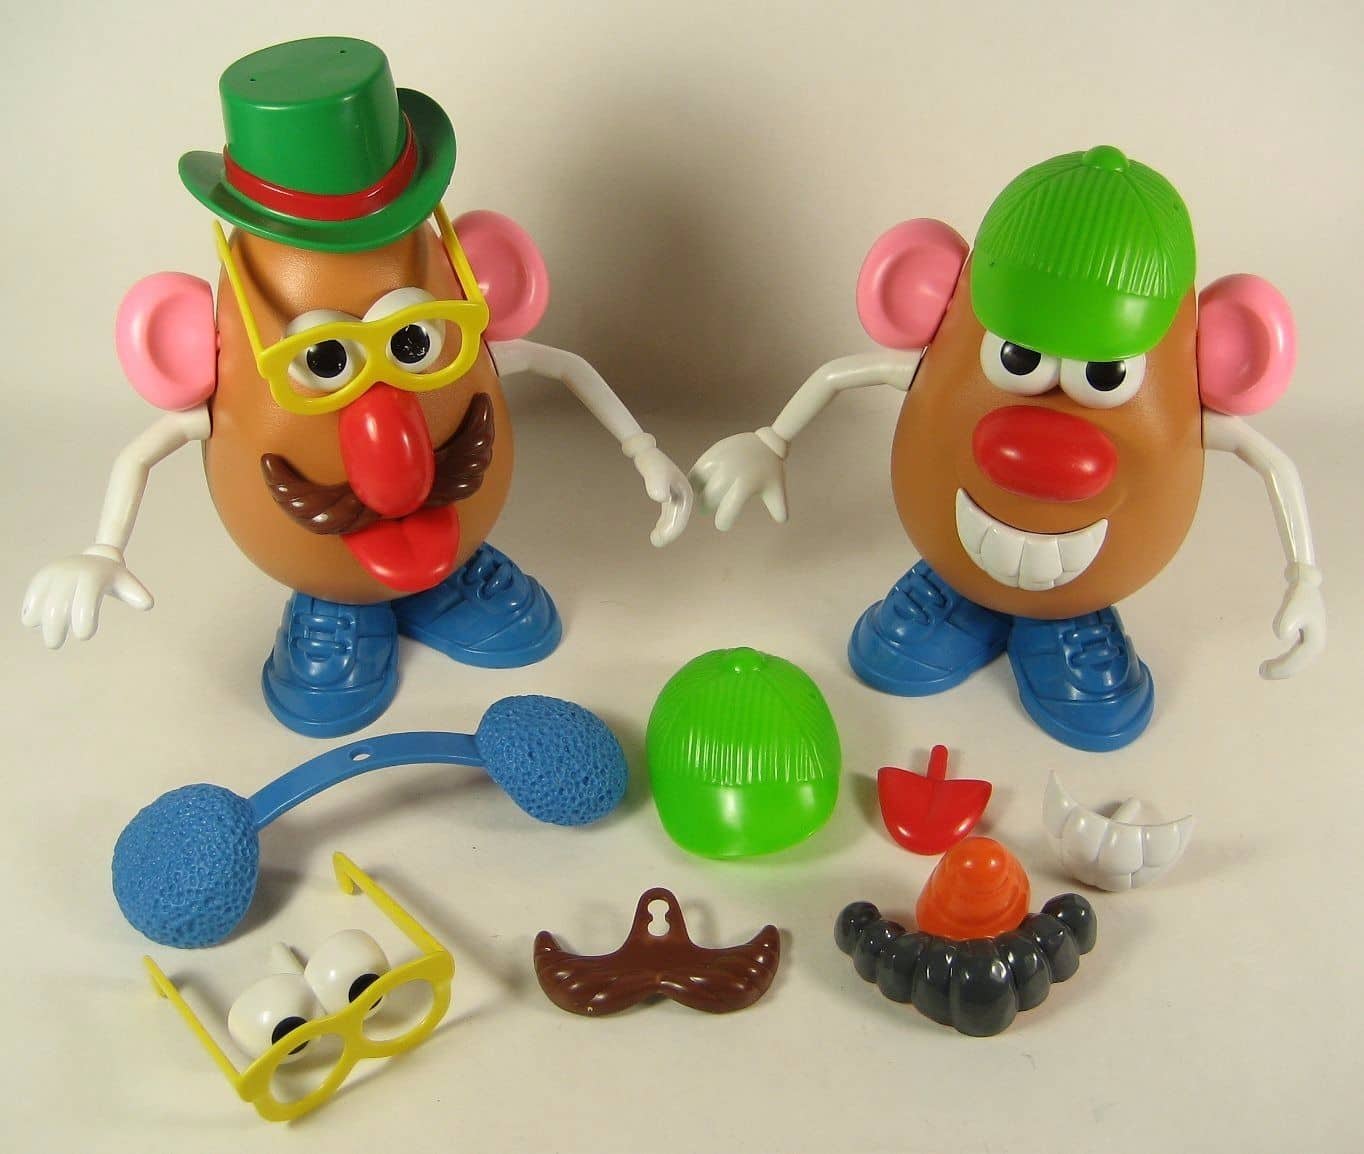 Mr. Potato Head,Even though Mr. Potato Head was developed and distributed by Hasbro beginning in 1952, it cannot be denied that any kid worth his salt in the 1980s had one. Most of the time, they were missing an eye or an arm or other limb or accessory.